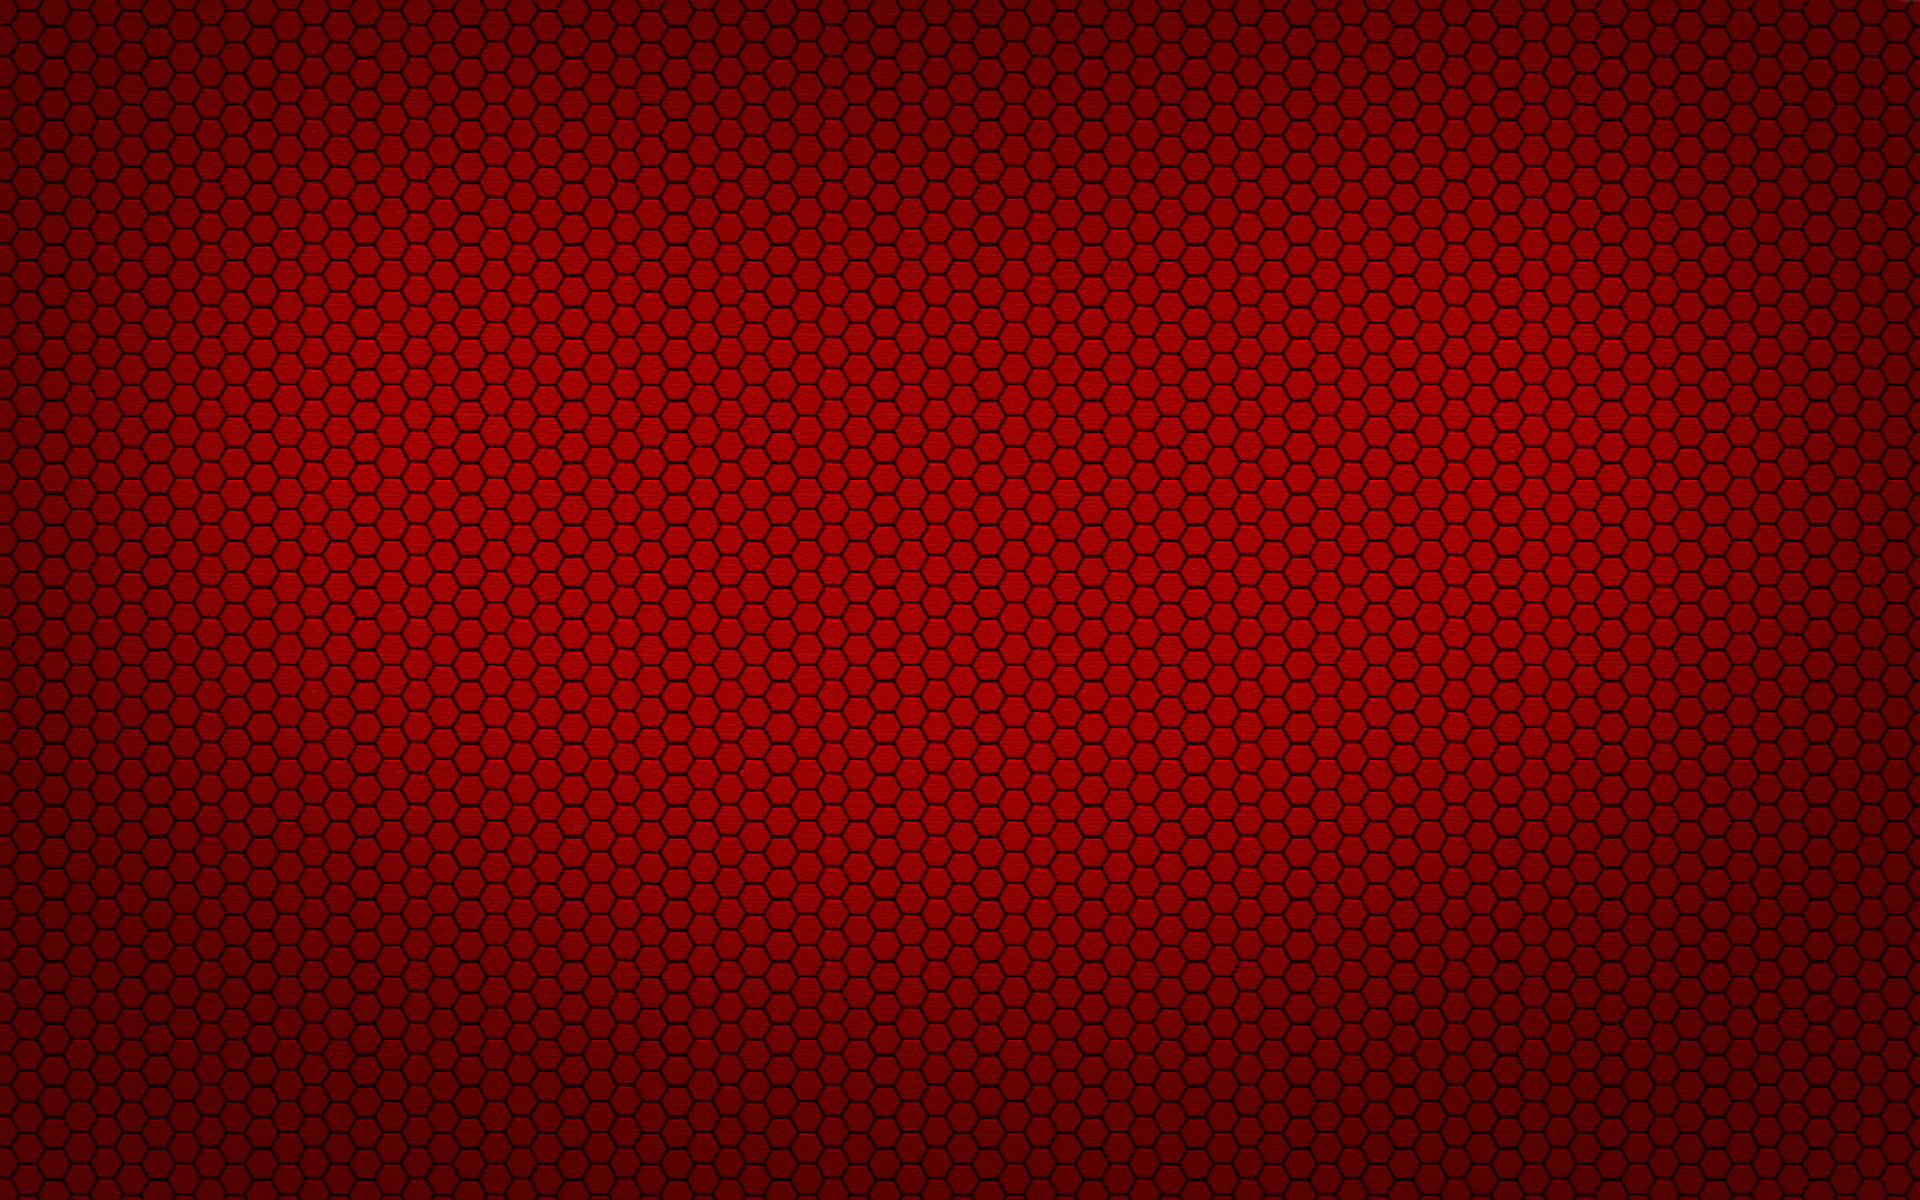 1920x1200 Honeycomb Pattern Wallpapers Top Free Honeycomb Pattern Backgrounds